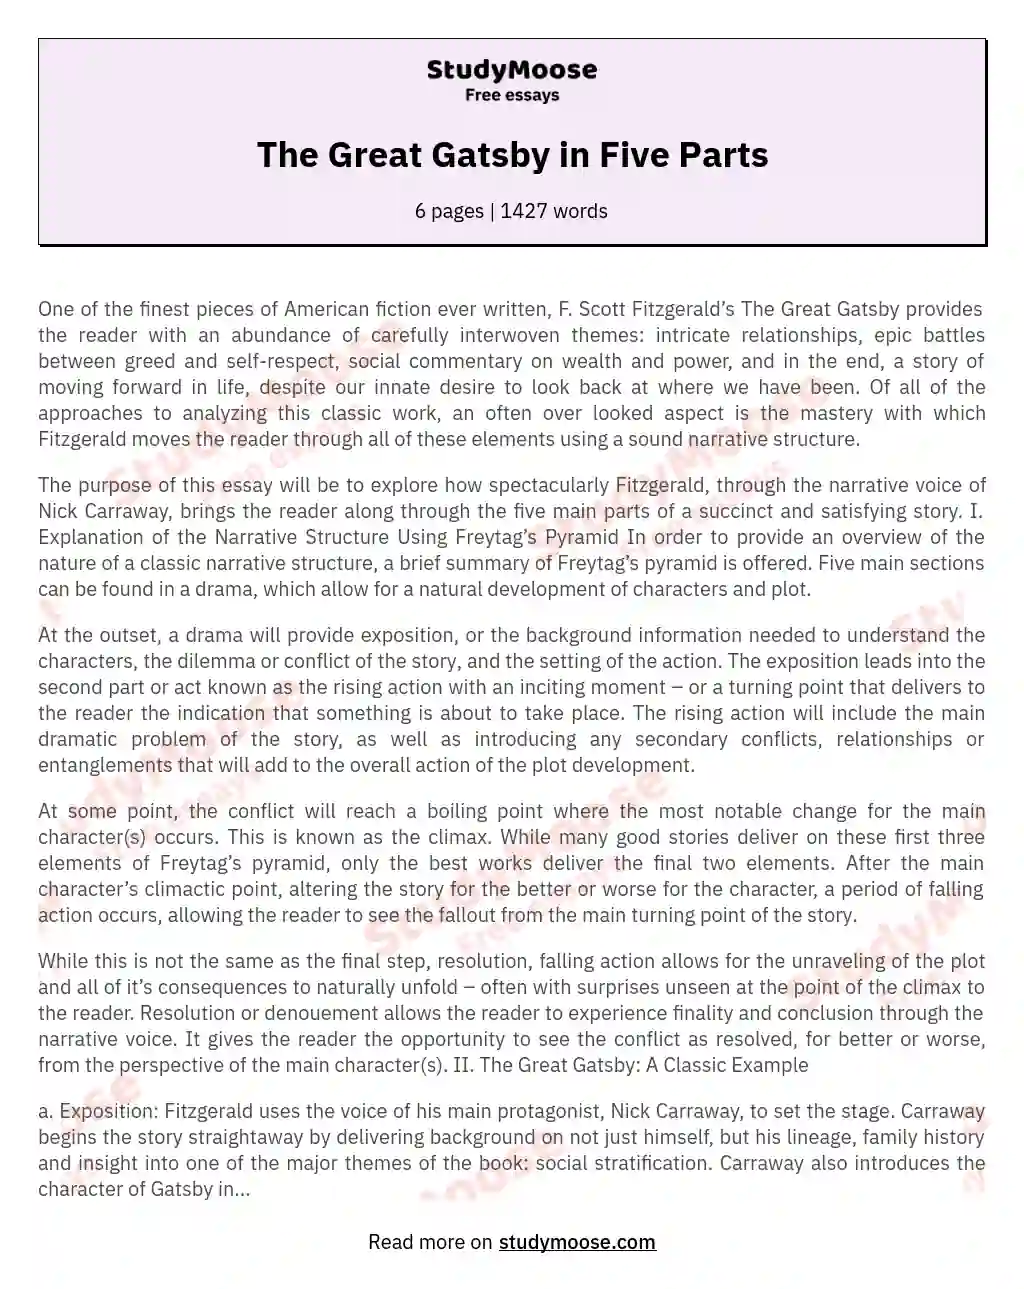 The Great Gatsby in Five Parts essay